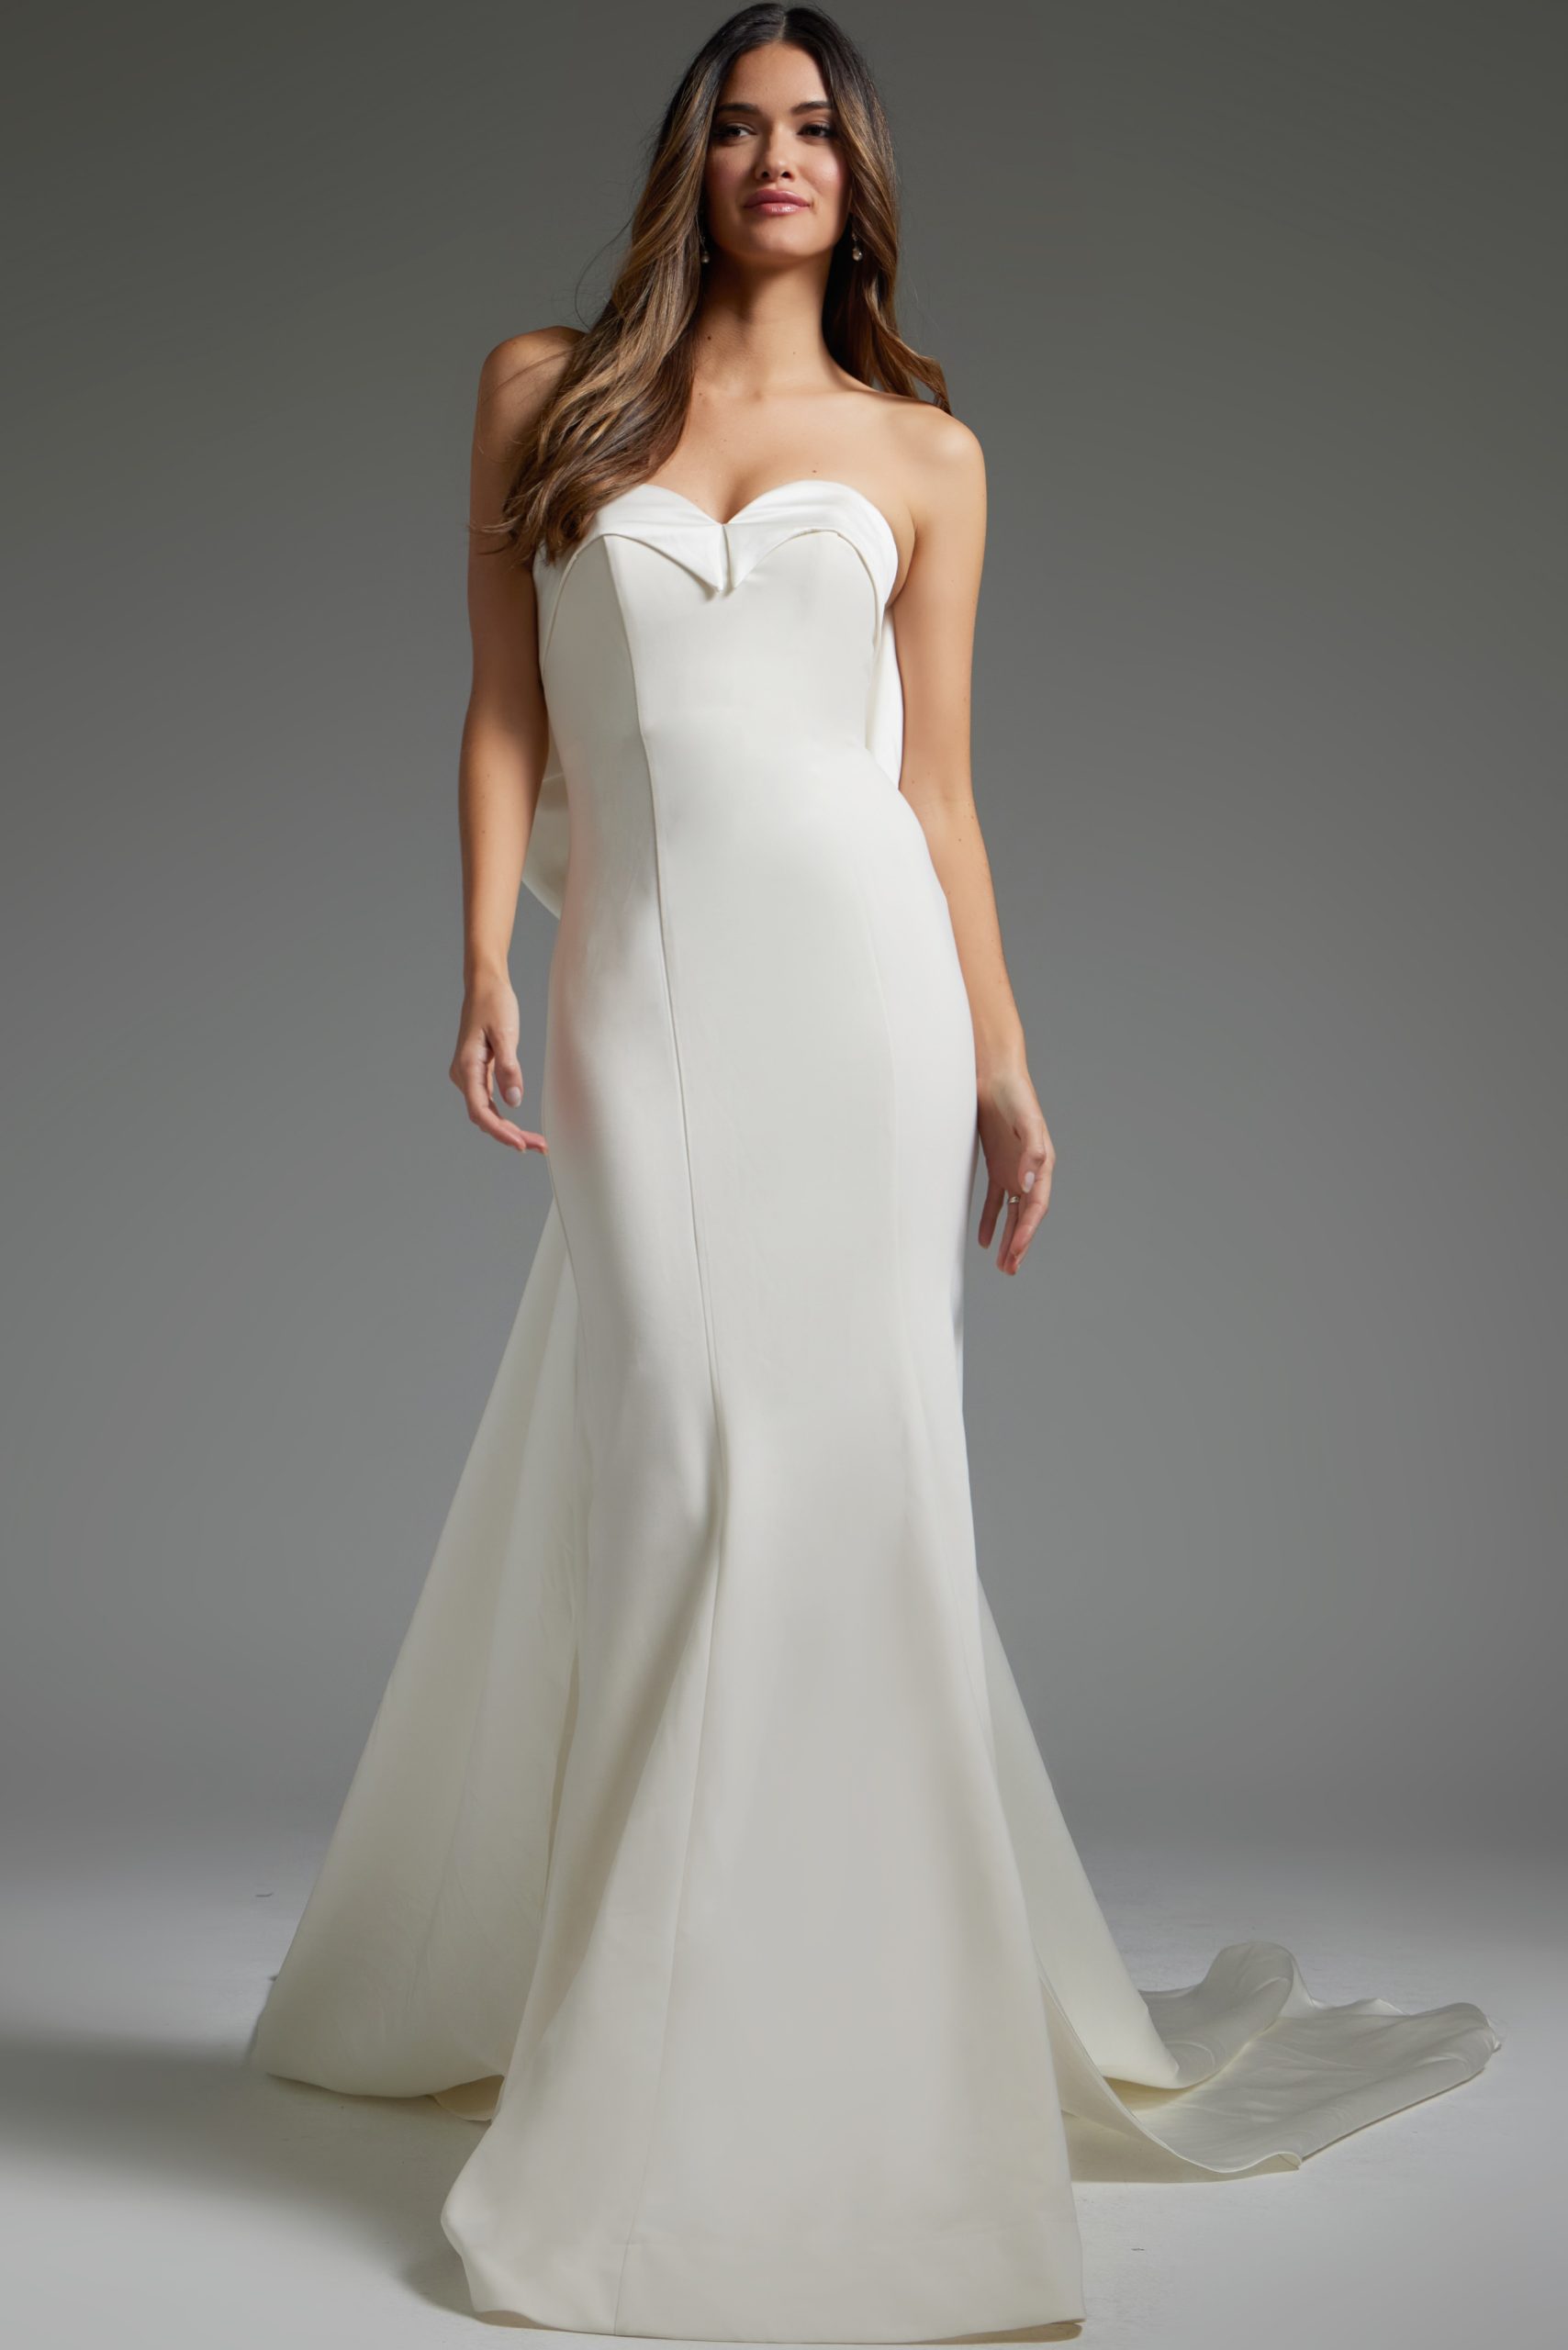 Strapless Sweetheart Neckline Simple Bridal Gown JB05352